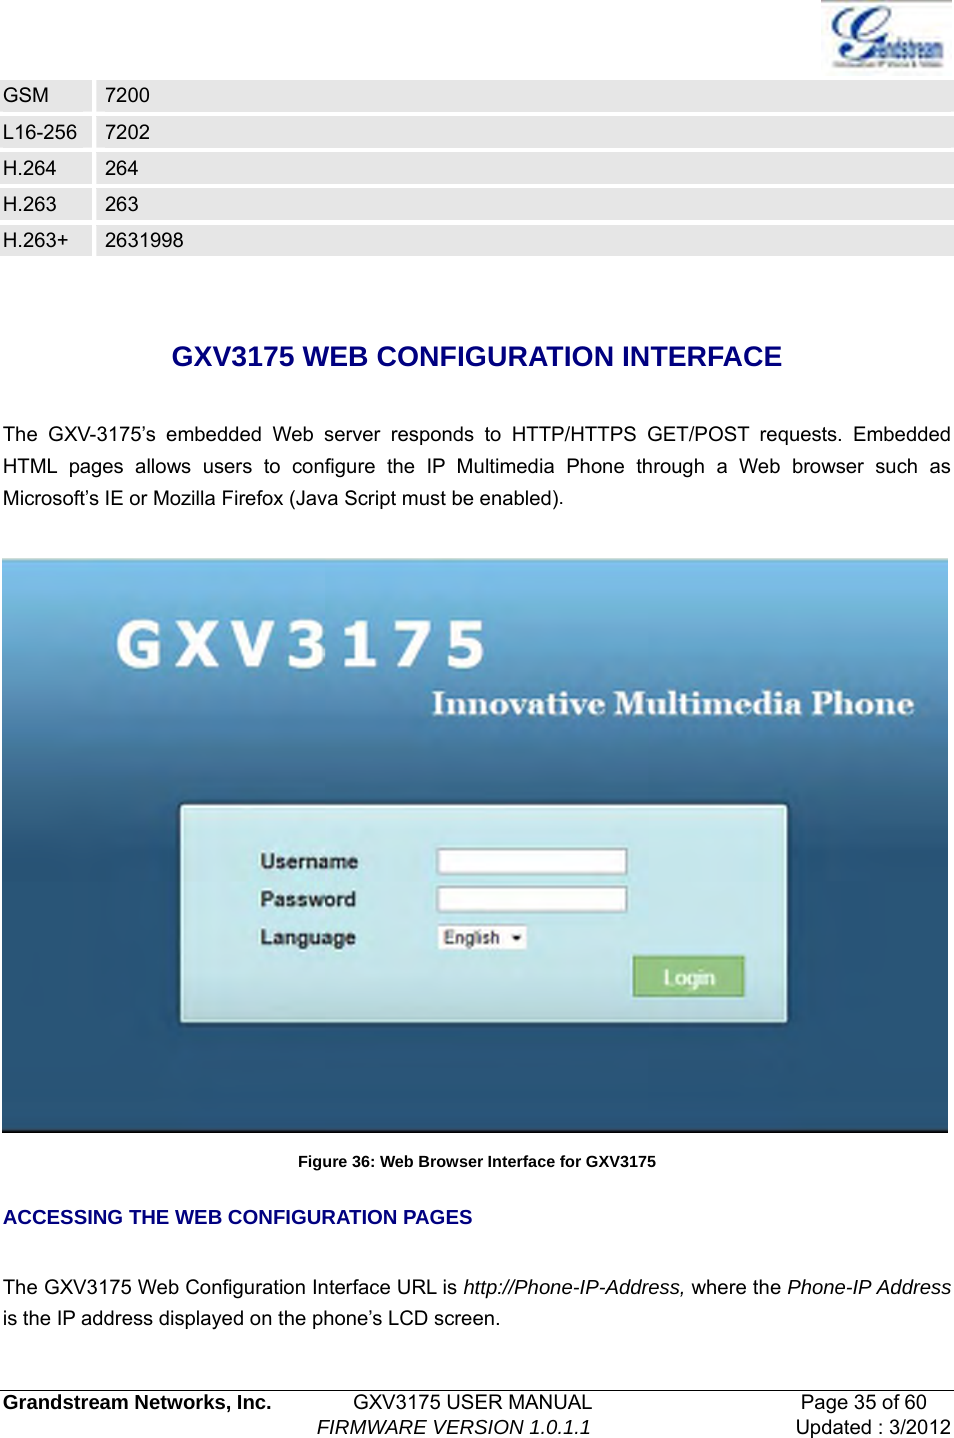   Grandstream Networks, Inc.        GXV3175 USER MANUAL                     Page 35 of 60                                FIRMWARE VERSION 1.0.1.1 Updated : 3/2012  GSM  7200 L16-256  7202 H.264  264 H.263  263 H.263+  2631998  GXV3175 WEB CONFIGURATION INTERFACE  The GXV-3175’s embedded Web server responds to HTTP/HTTPS GET/POST requests. Embedded HTML pages allows users to configure the IP Multimedia Phone through a Web browser such as Microsoft’s IE or Mozilla Firefox (Java Script must be enabled).     Figure 36: Web Browser Interface for GXV3175 ACCESSING THE WEB CONFIGURATION PAGES  The GXV3175 Web Configuration Interface URL is http://Phone-IP-Address, where the Phone-IP Address is the IP address displayed on the phone’s LCD screen.  